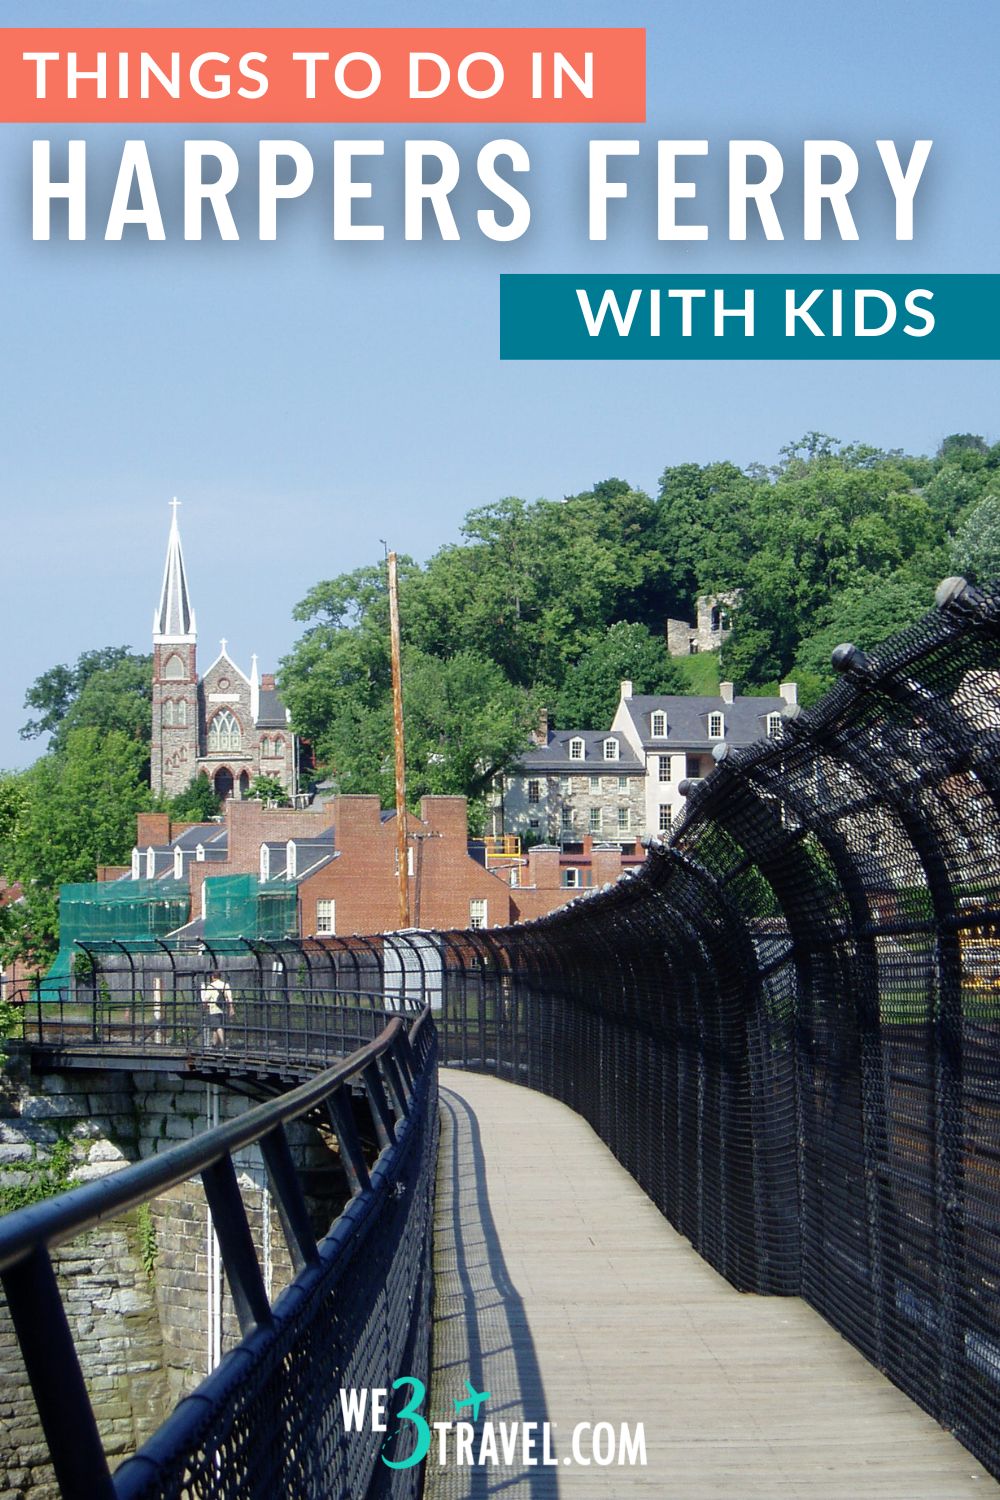 Harpers Ferry, West Virginia is a great destination to visit with kids, full of history at the Harpers Ferry National Historical Park, and adventure, with the confluence of the Potomac and Shenandoah Rivers. 